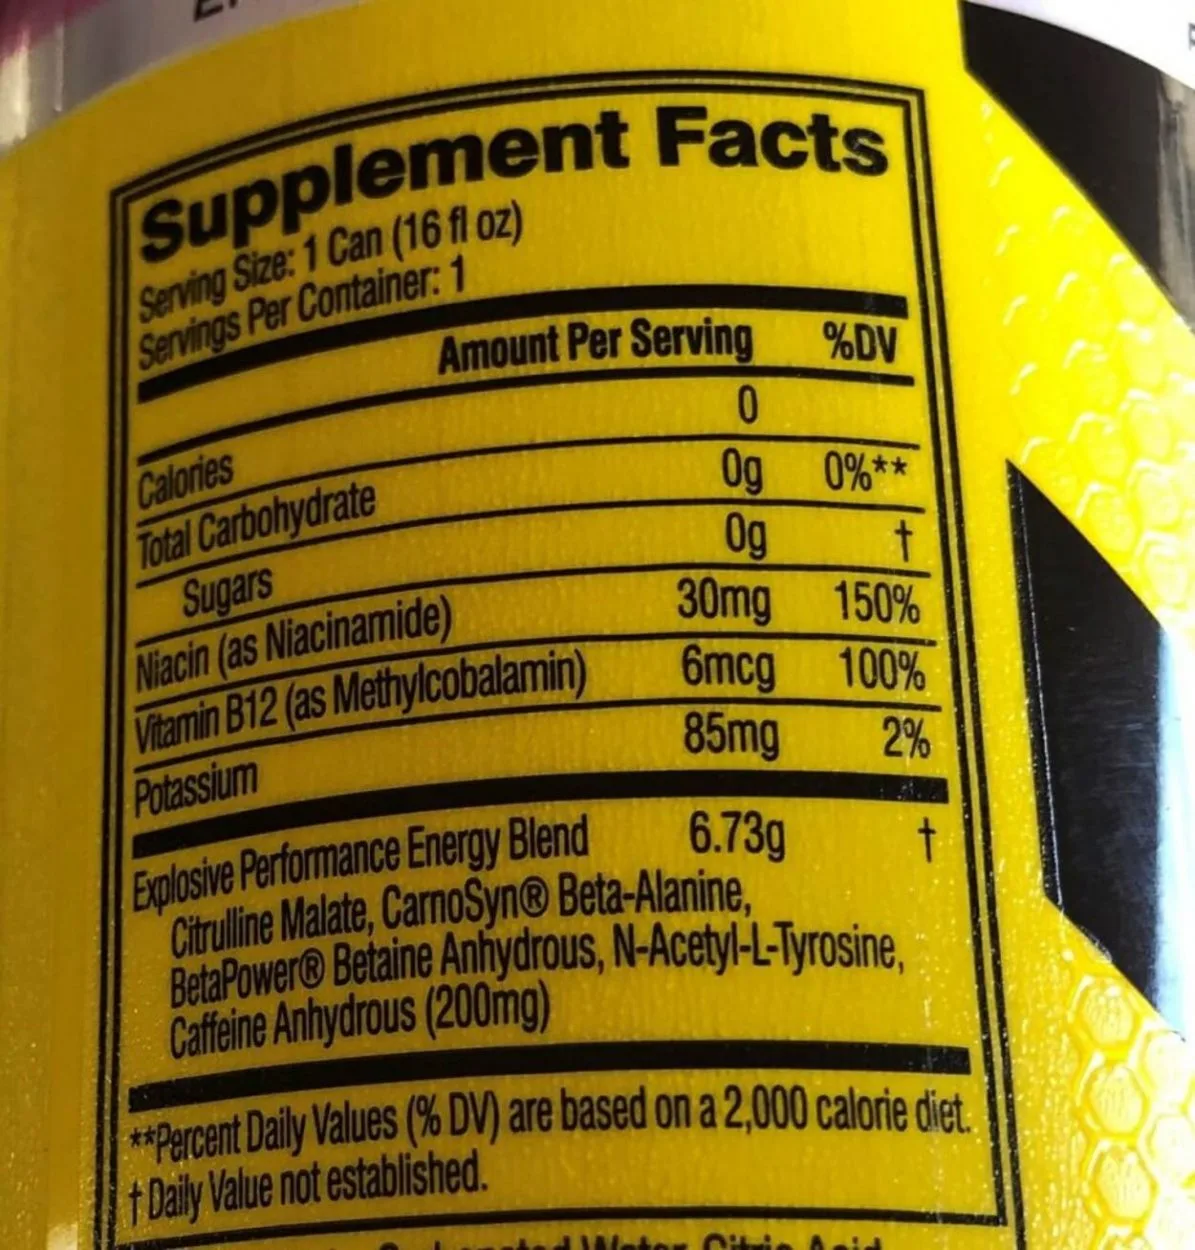 The nutrition facts of a can of C4 Energy Drink.